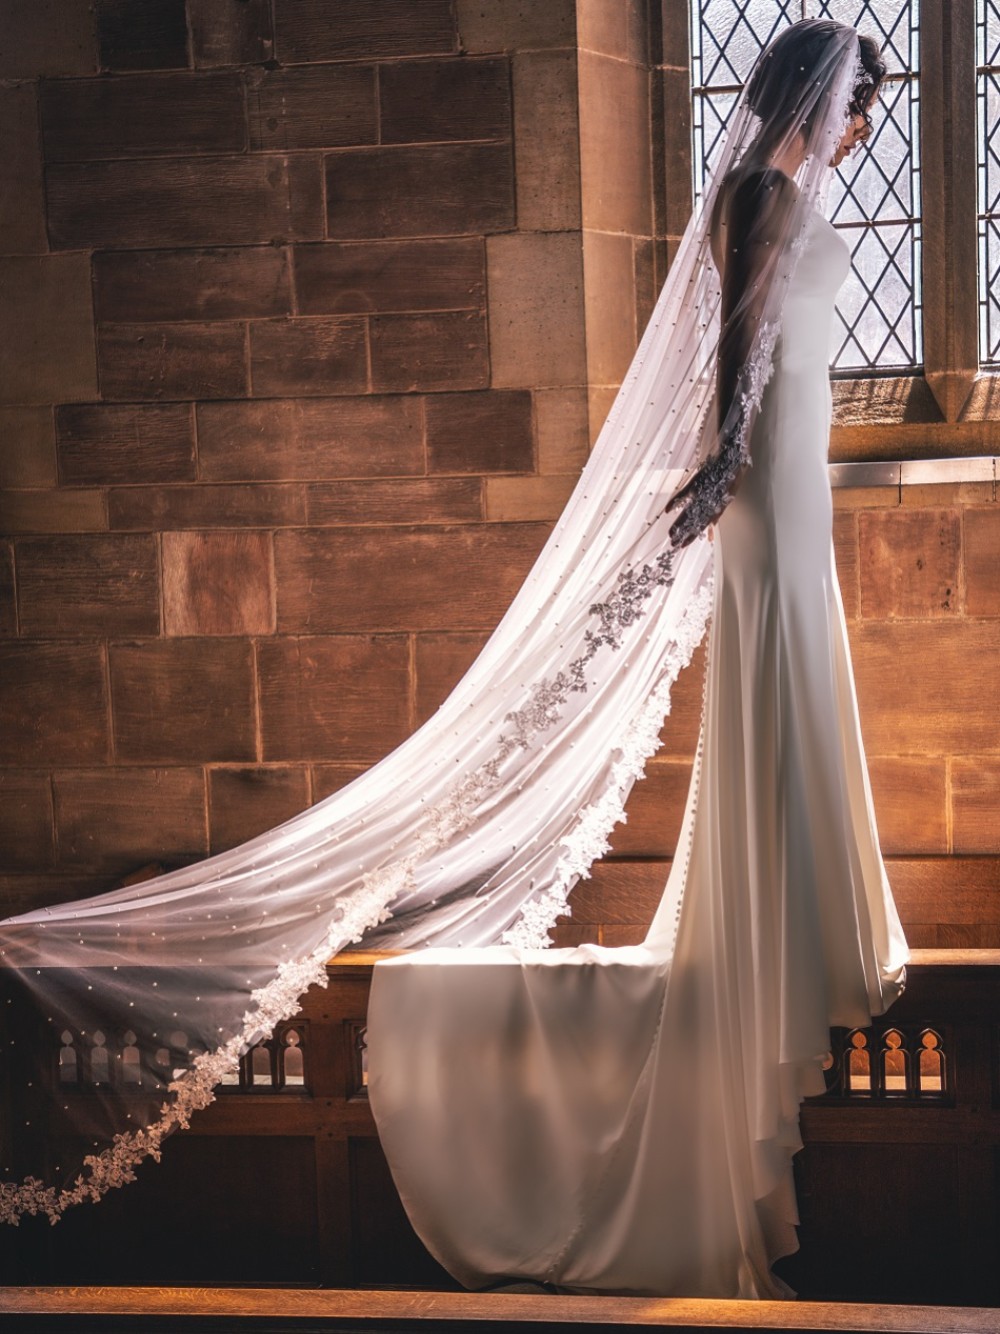 Photograph of Perfect Bridal Ivory Single Tier Pearl Embellished Veil with Floral Lace Edge